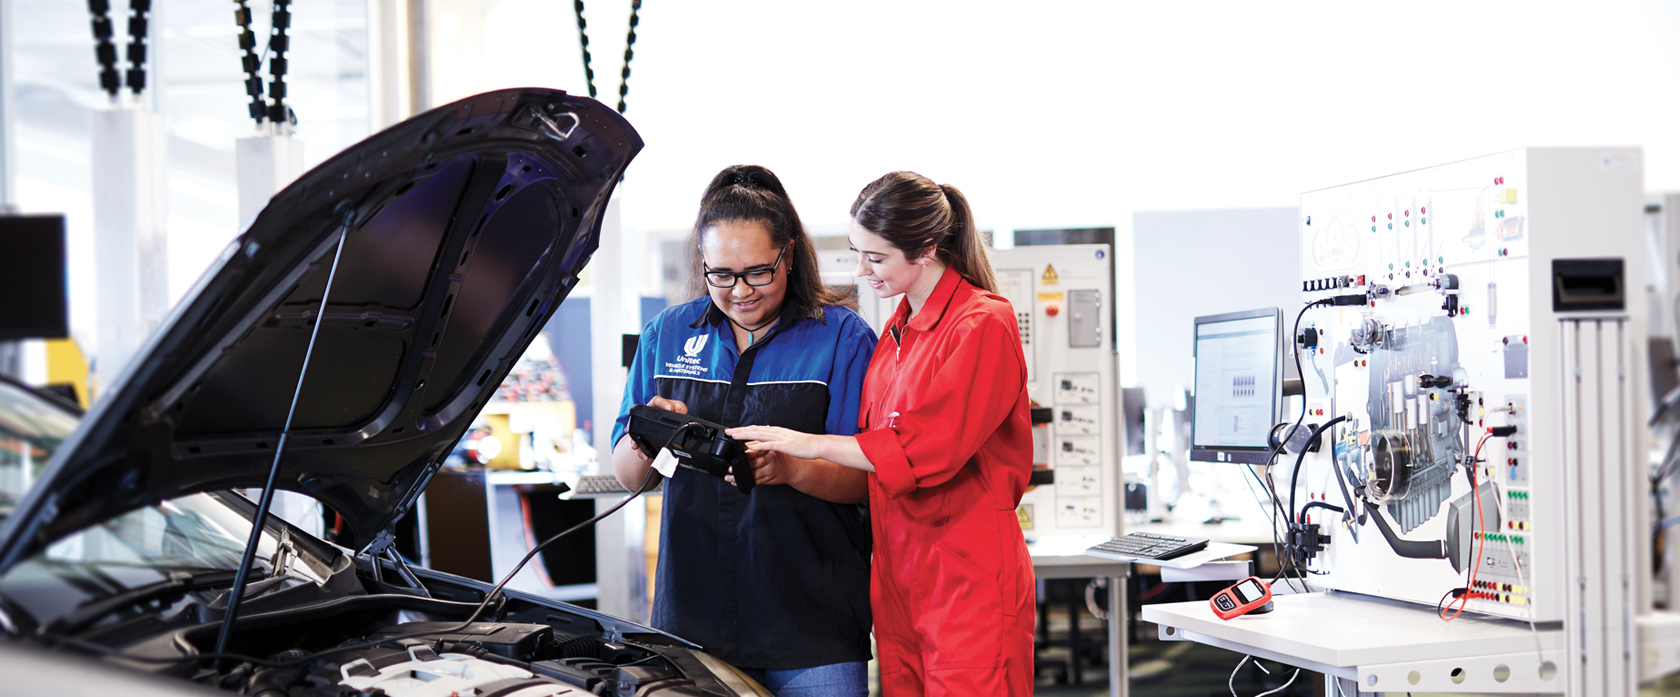 Study Automotive Engineering at Unitec Institute of Technology in Auckland, New Zealand!